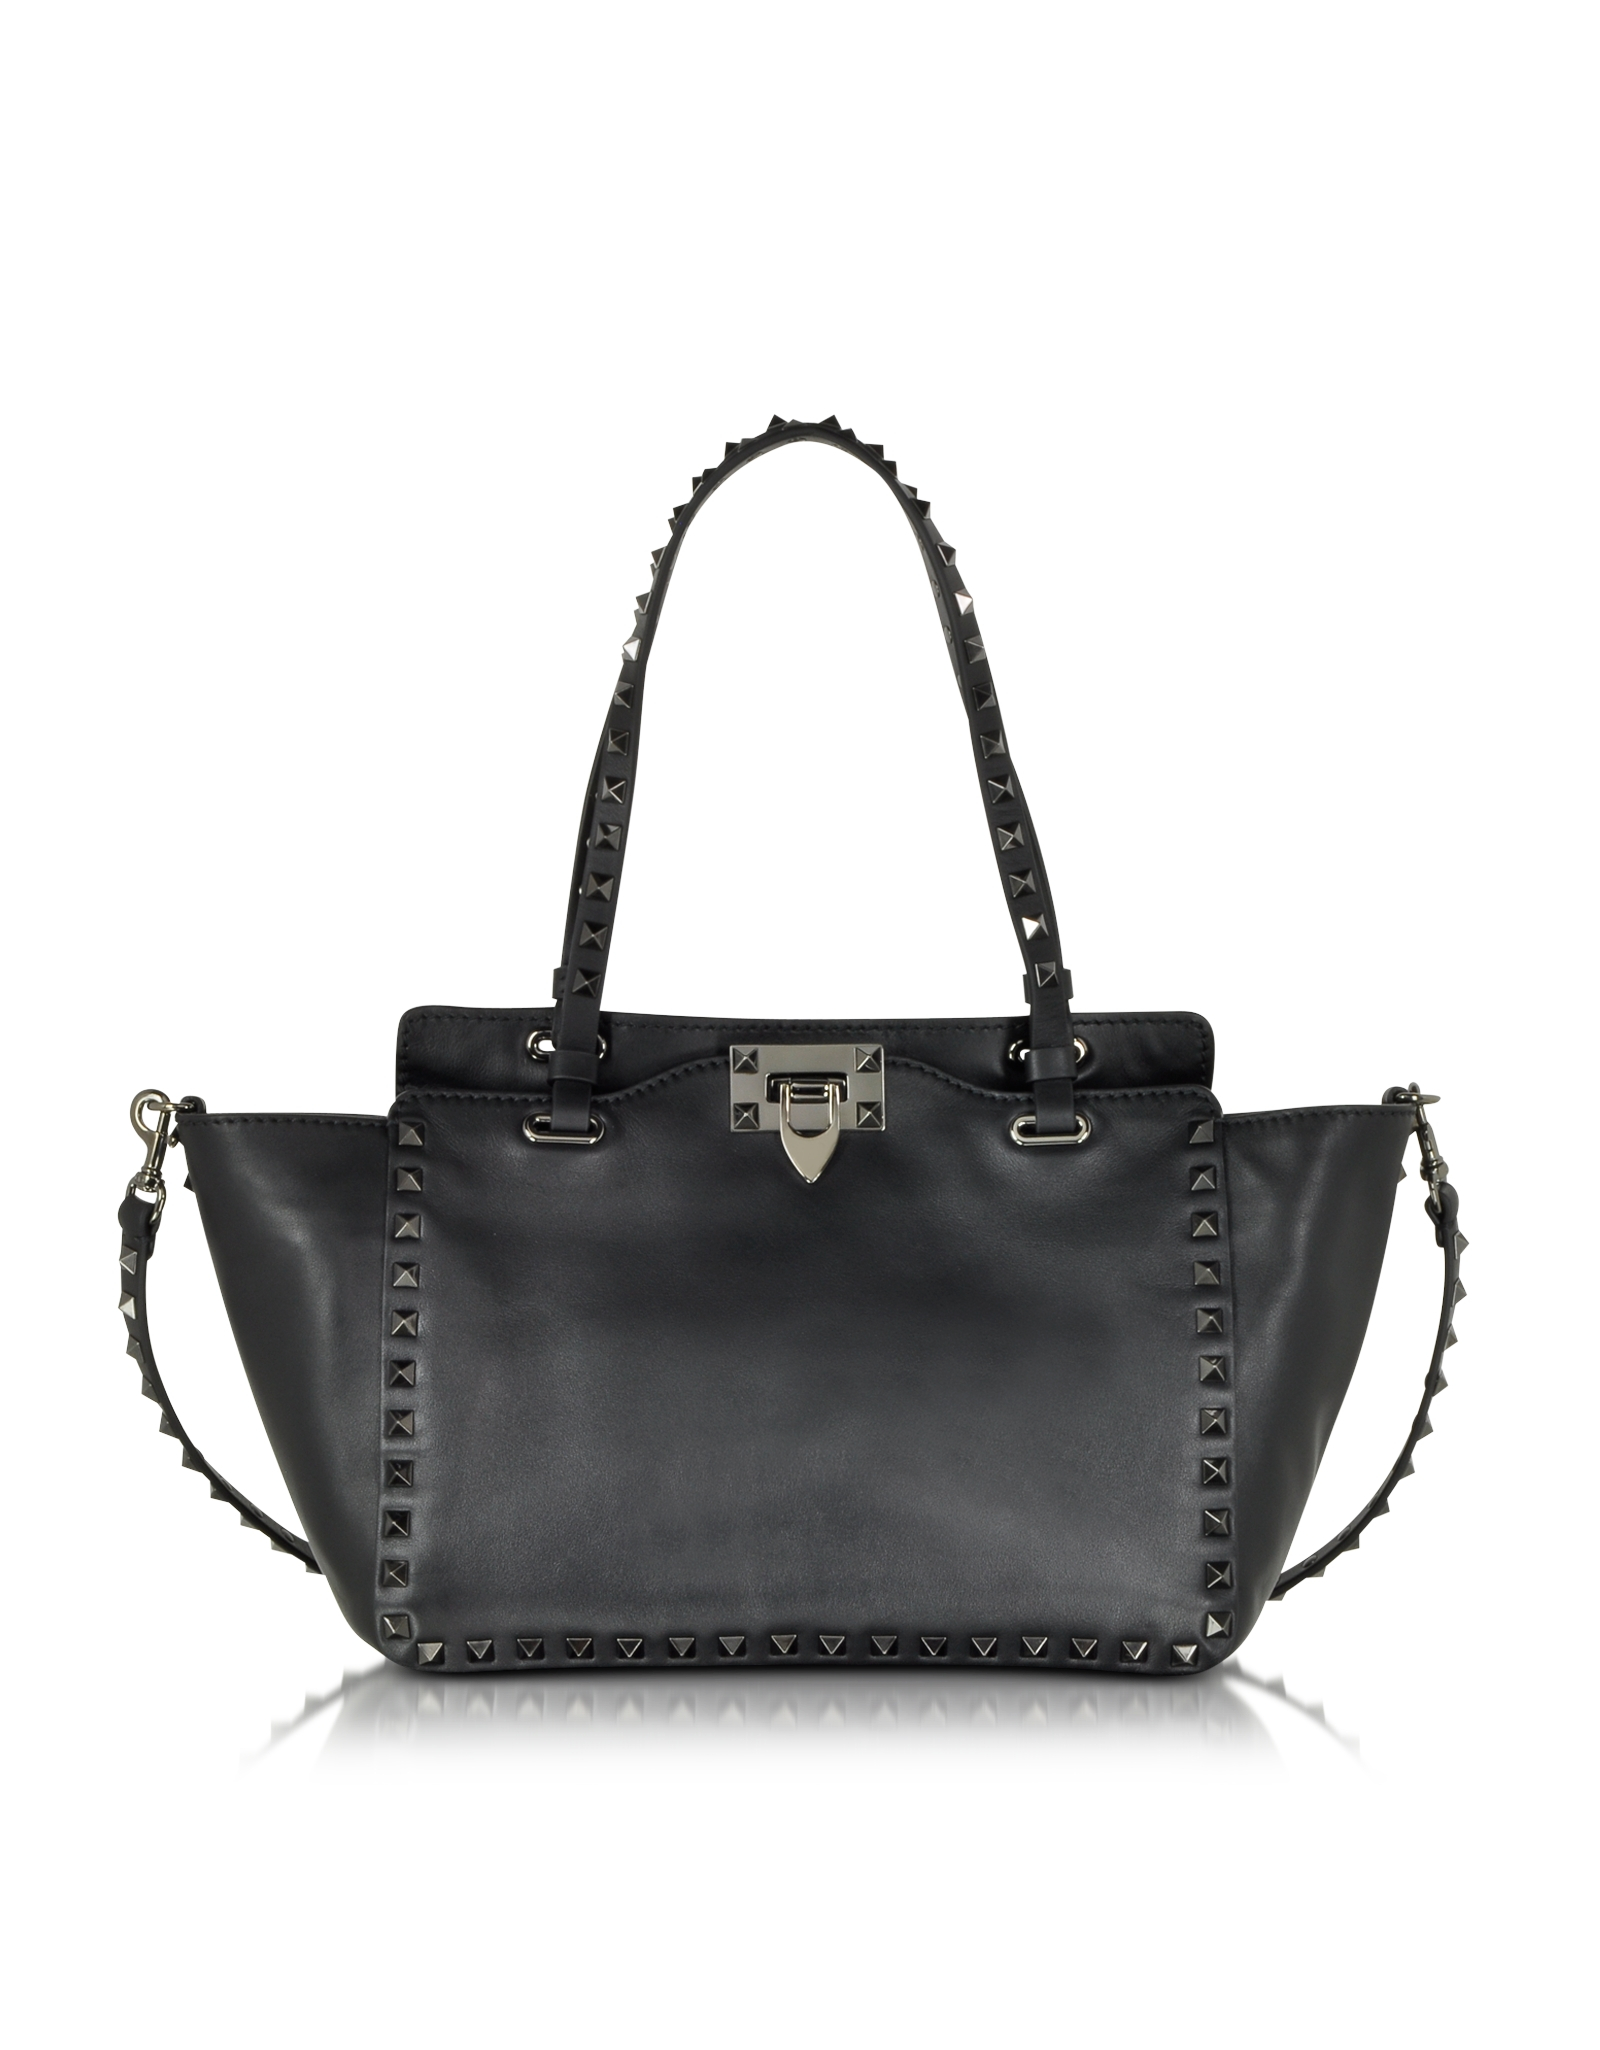 Lyst - Valentino Rockstud Noir Small Leather Tote in Black